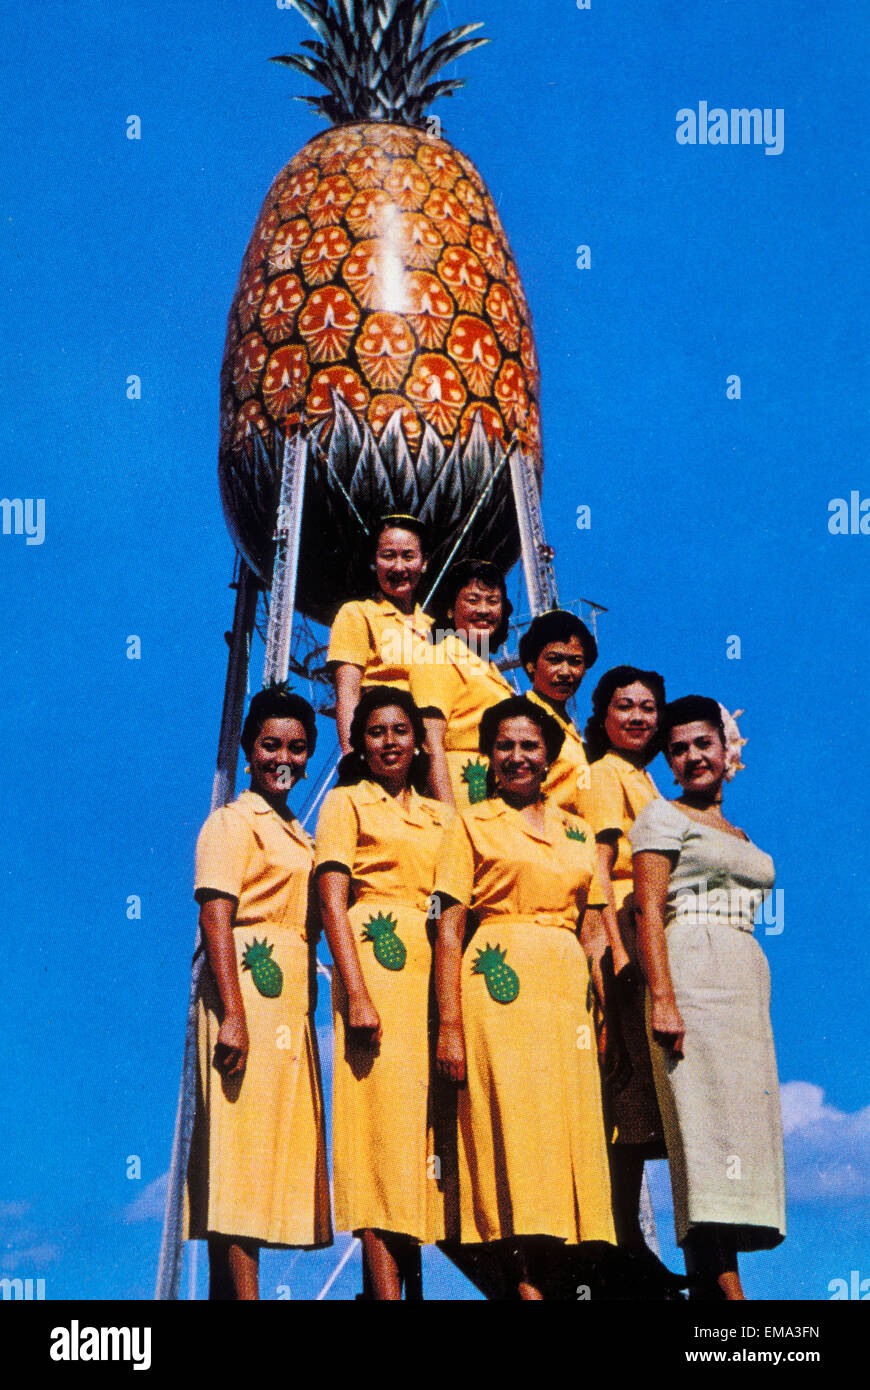 C.1960 Hawaii, Oahu, Female Workers In Yellow Uniform Standing In Front Of Dole Cannery Pineapple, Blue Skies, Postcard Stock Photo